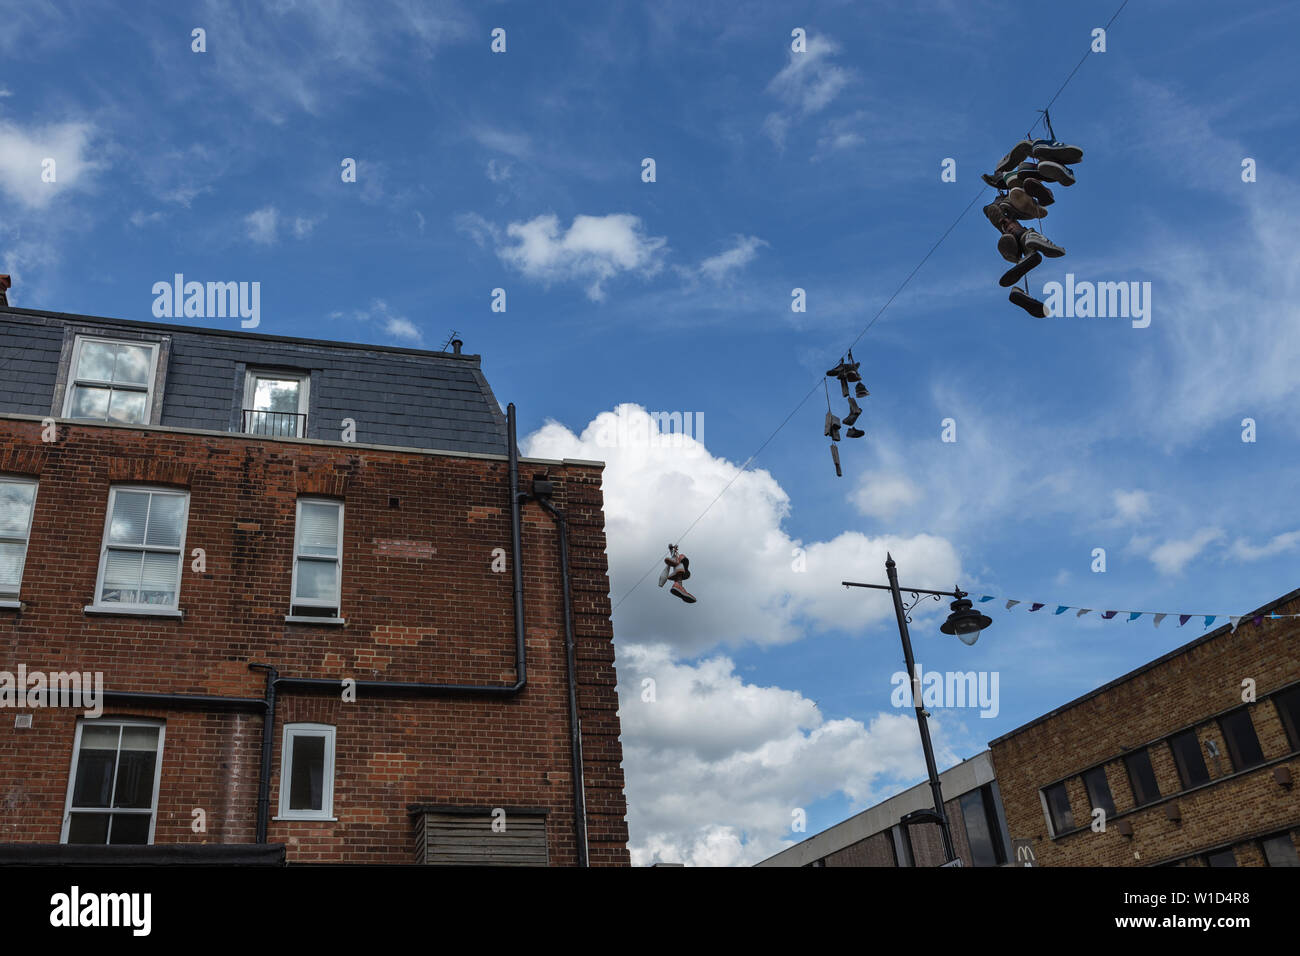 Shoefiti, the artistic expression of slinging shoes tied together by their laces over power lines, in Chapel Market, London, UK Stock Photo